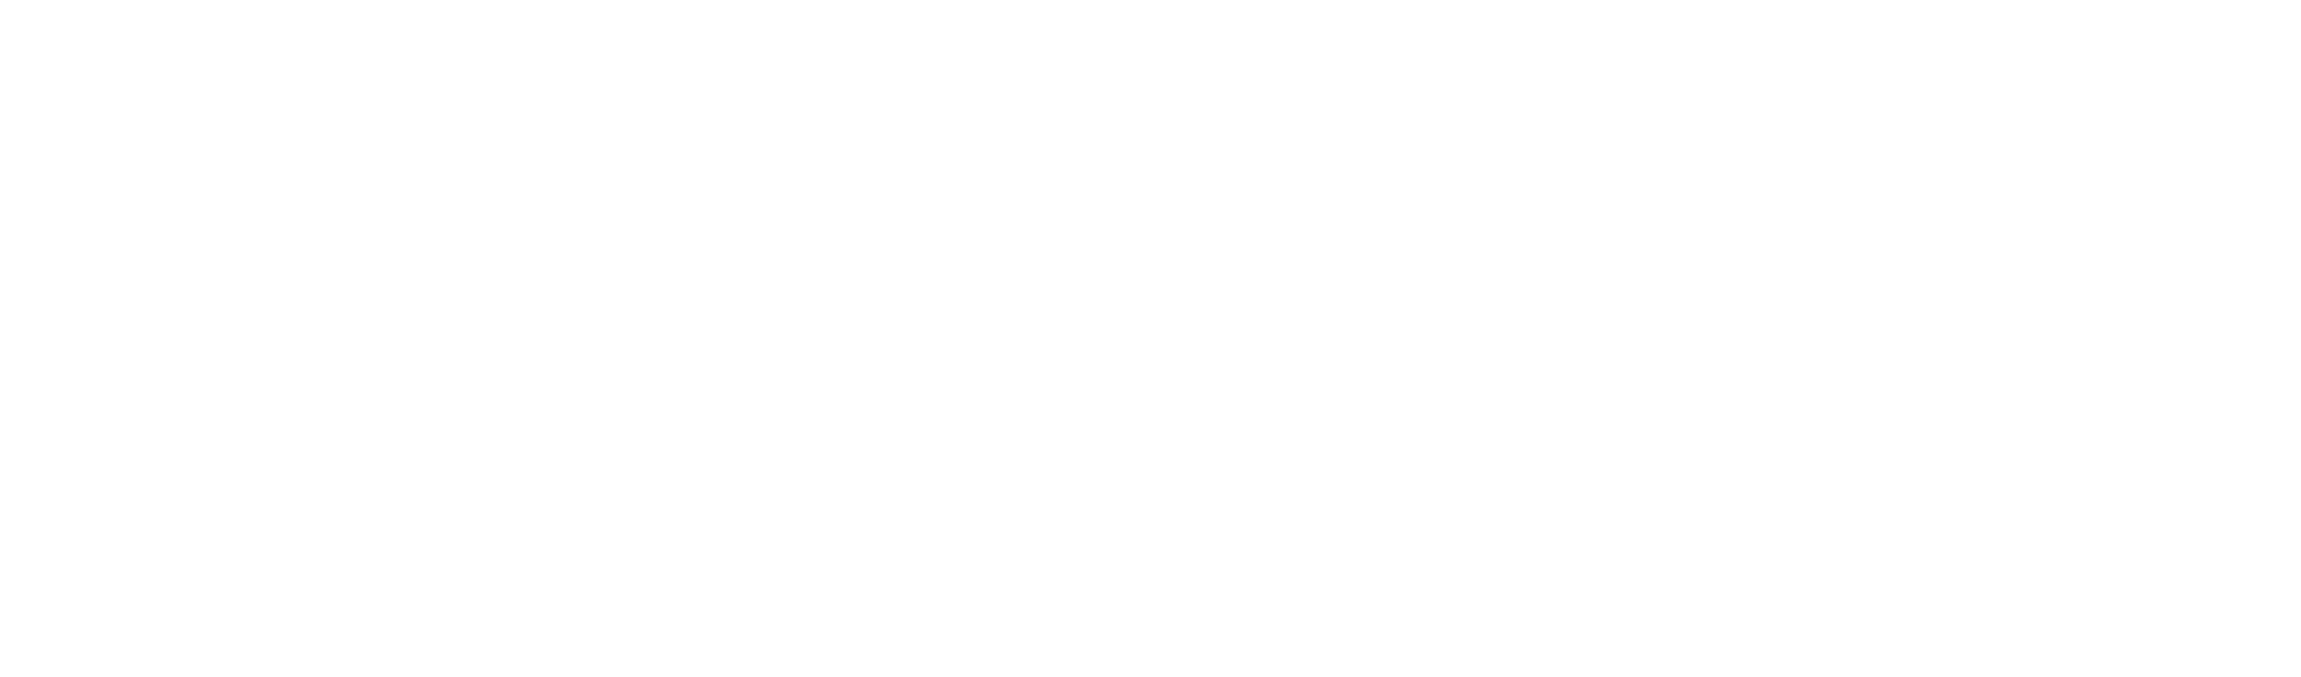 Financial Providence Group